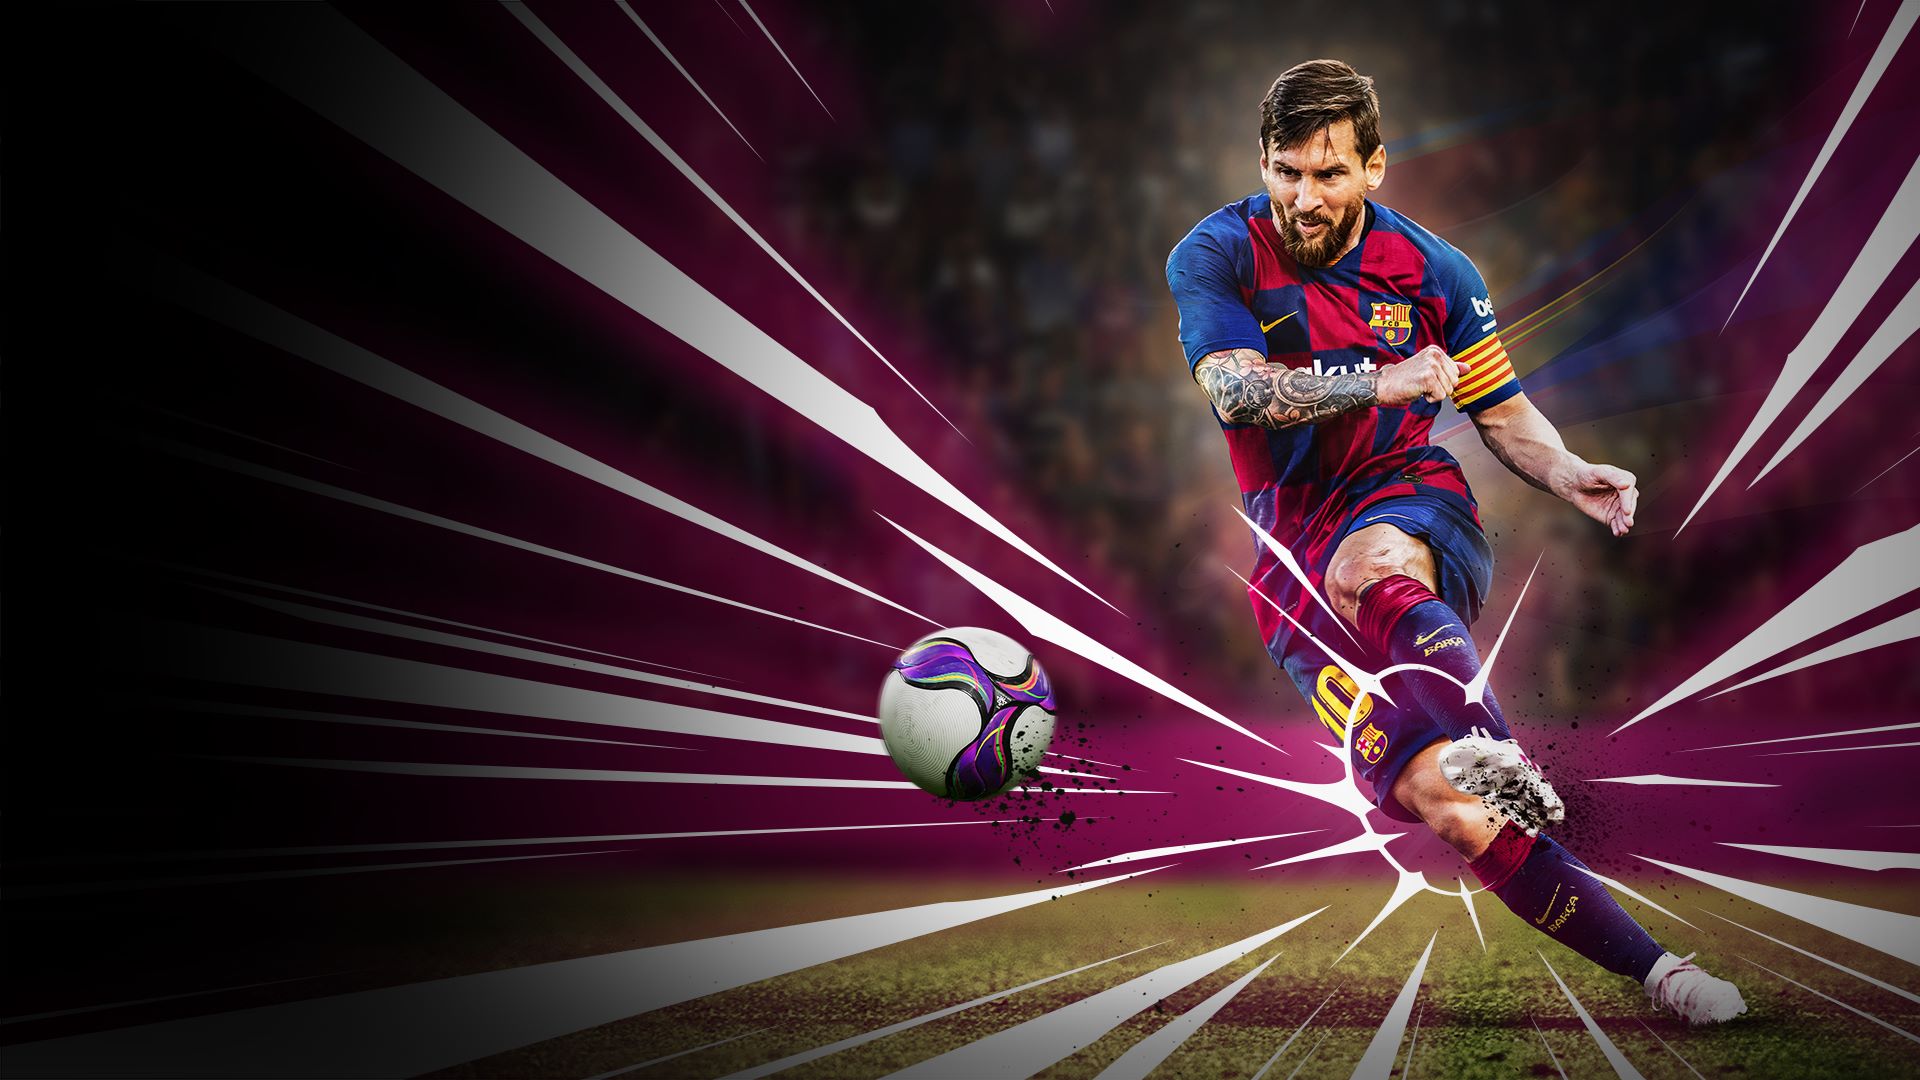 Messi 2020 Wallpapers